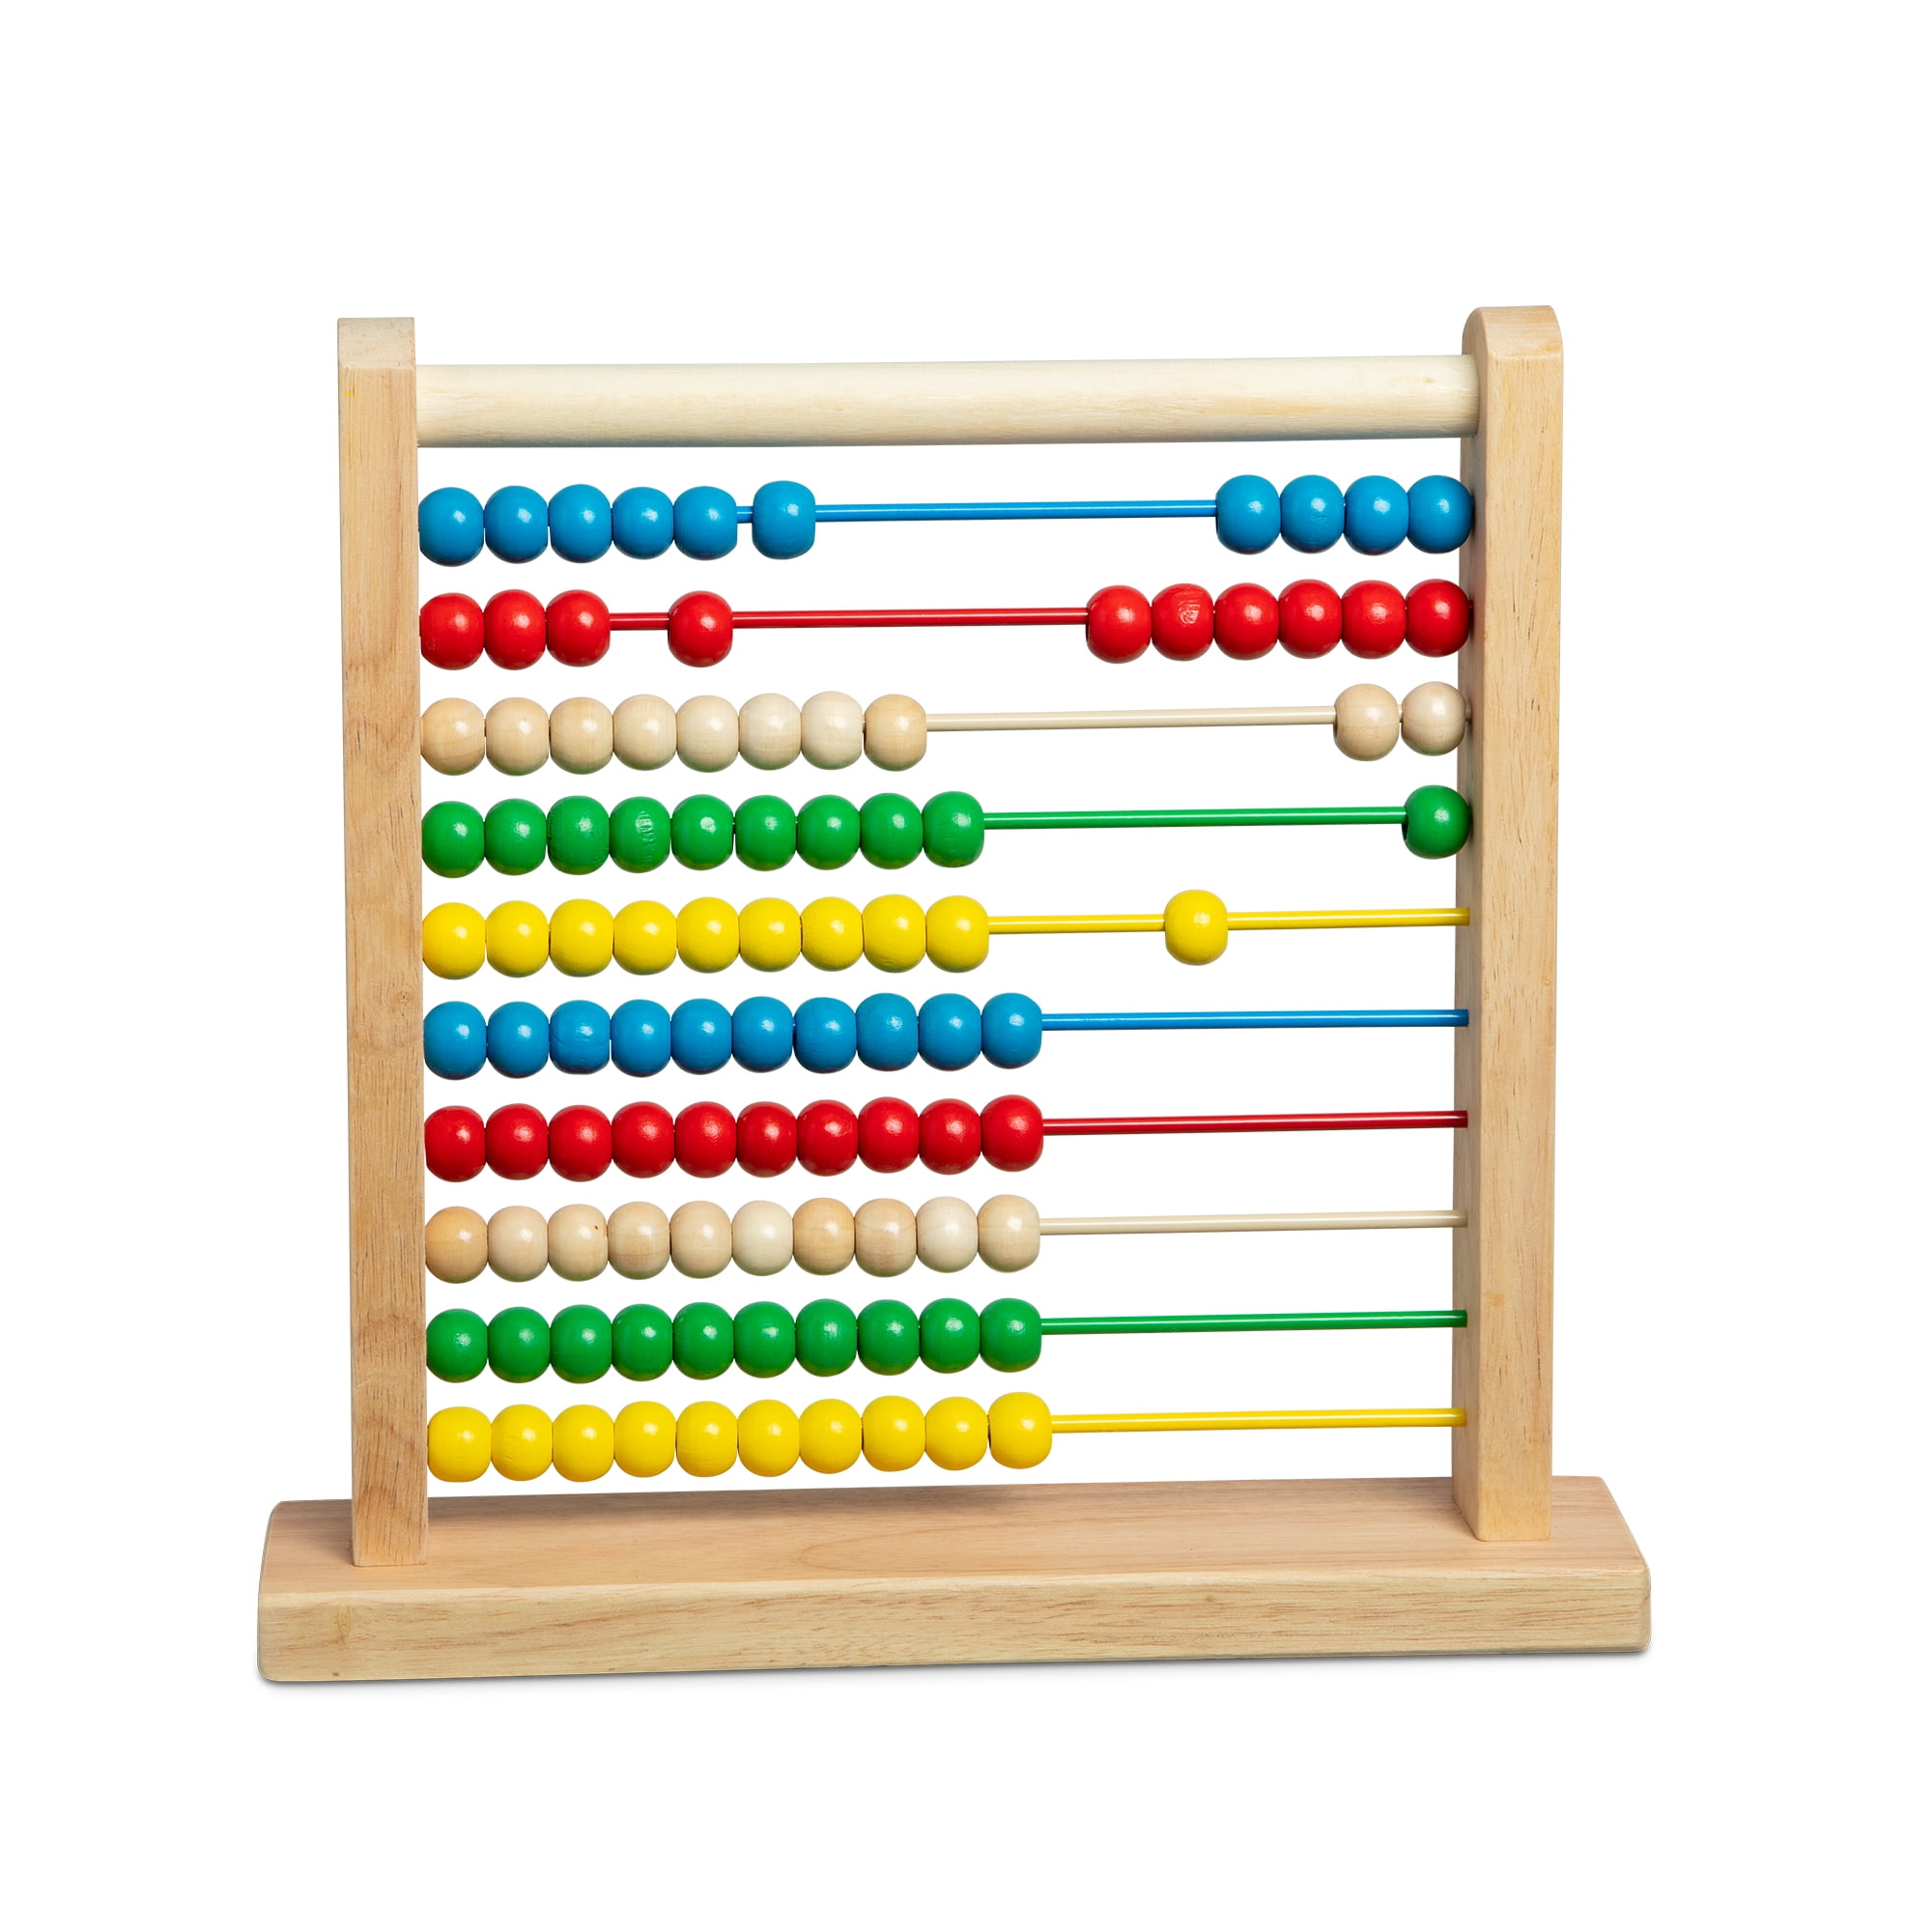 Wooden Abacus Classic Math Number Educational Counting Teaching Toys 100 Beads 